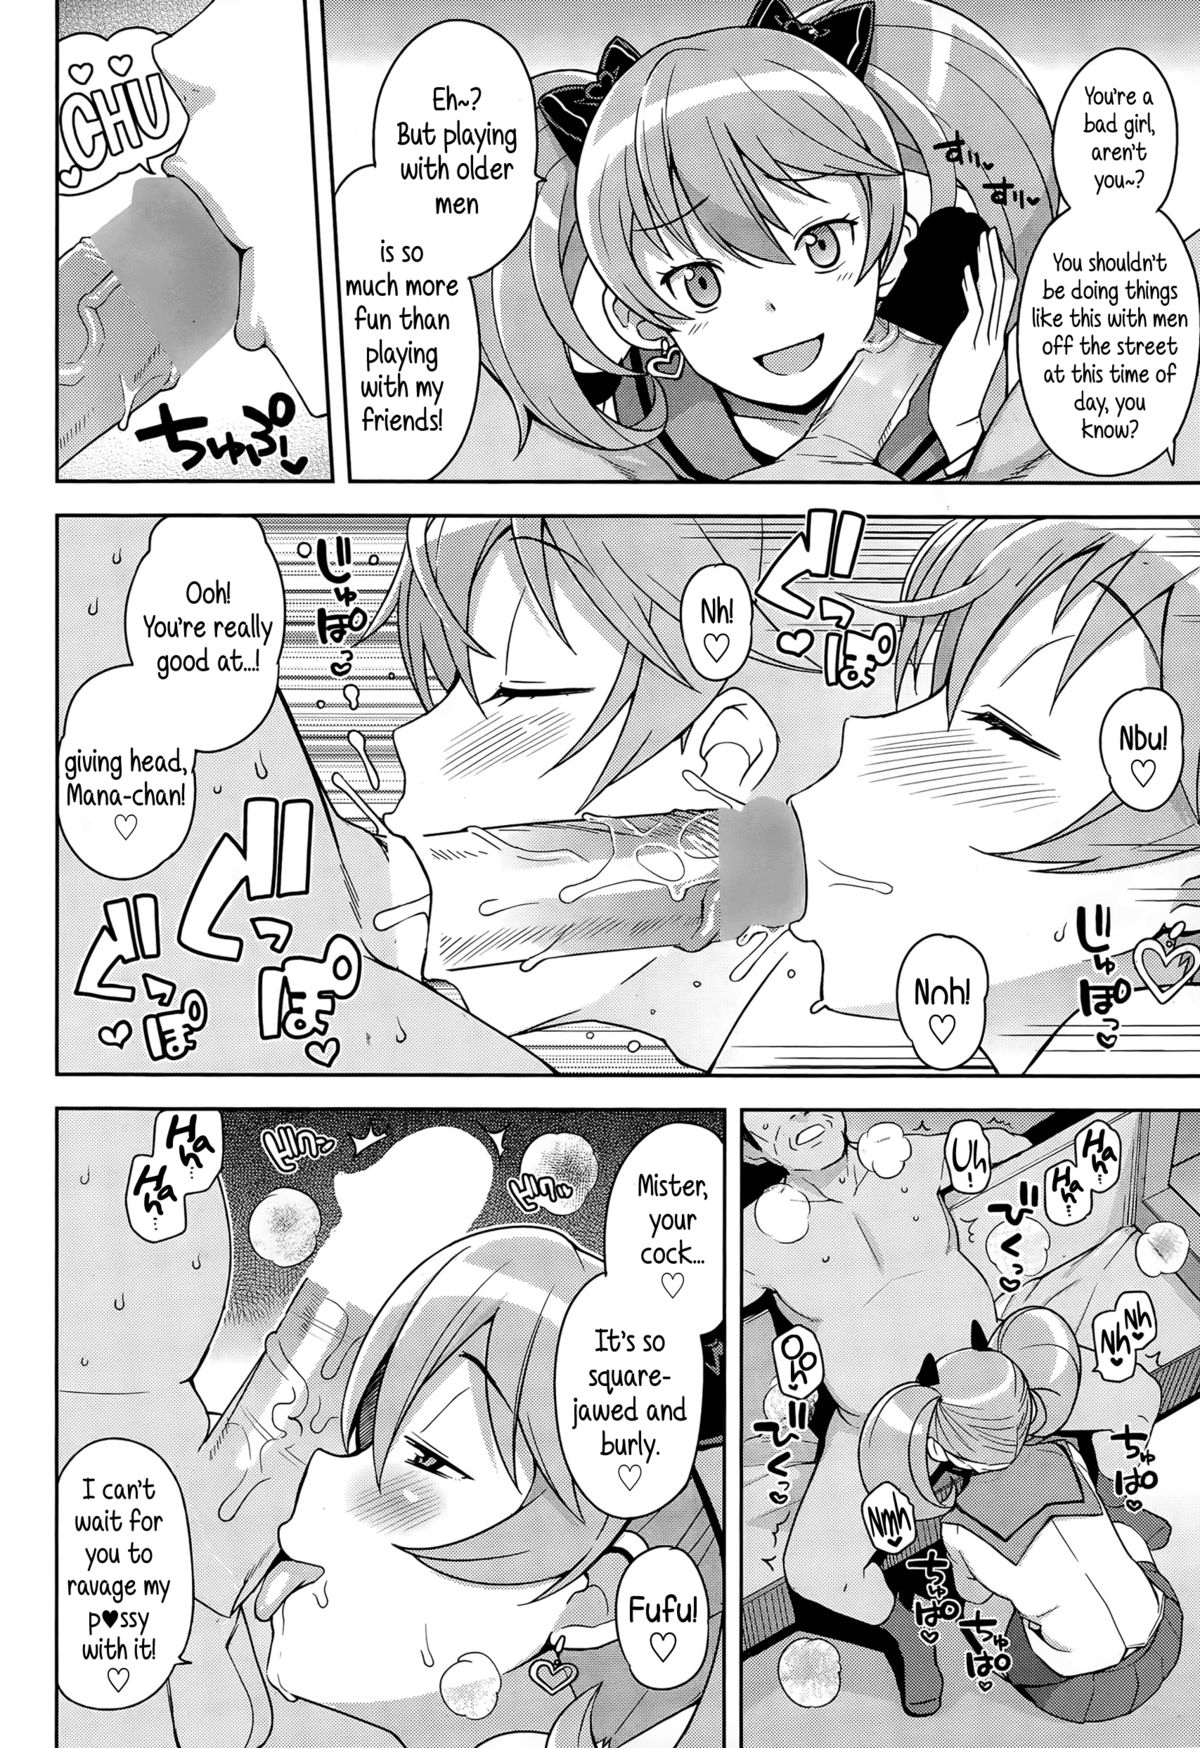 [Tamagoro] Hametomo Collection Ch. 1-2 | FuckBuddy Collection Ch. 1-2 [English] {5 a.m.} page 8 full